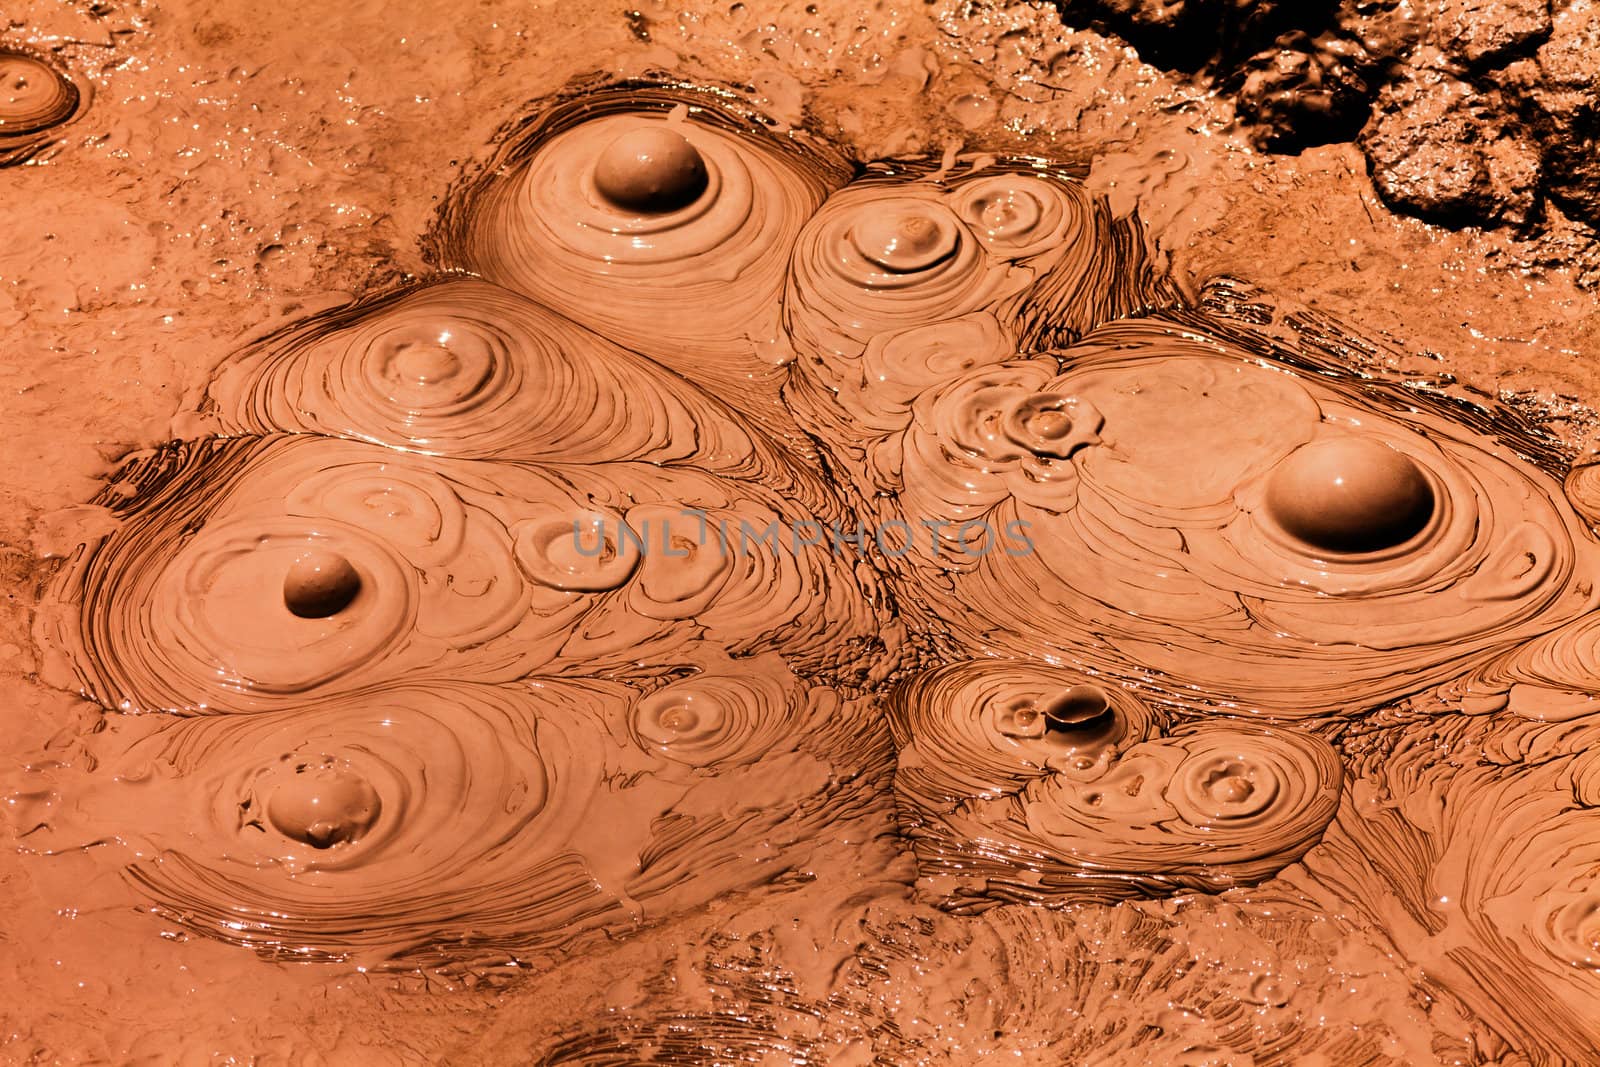 Background texture pattern of bubbling hot mud that boils up due to geothermal volcanic geyser activity